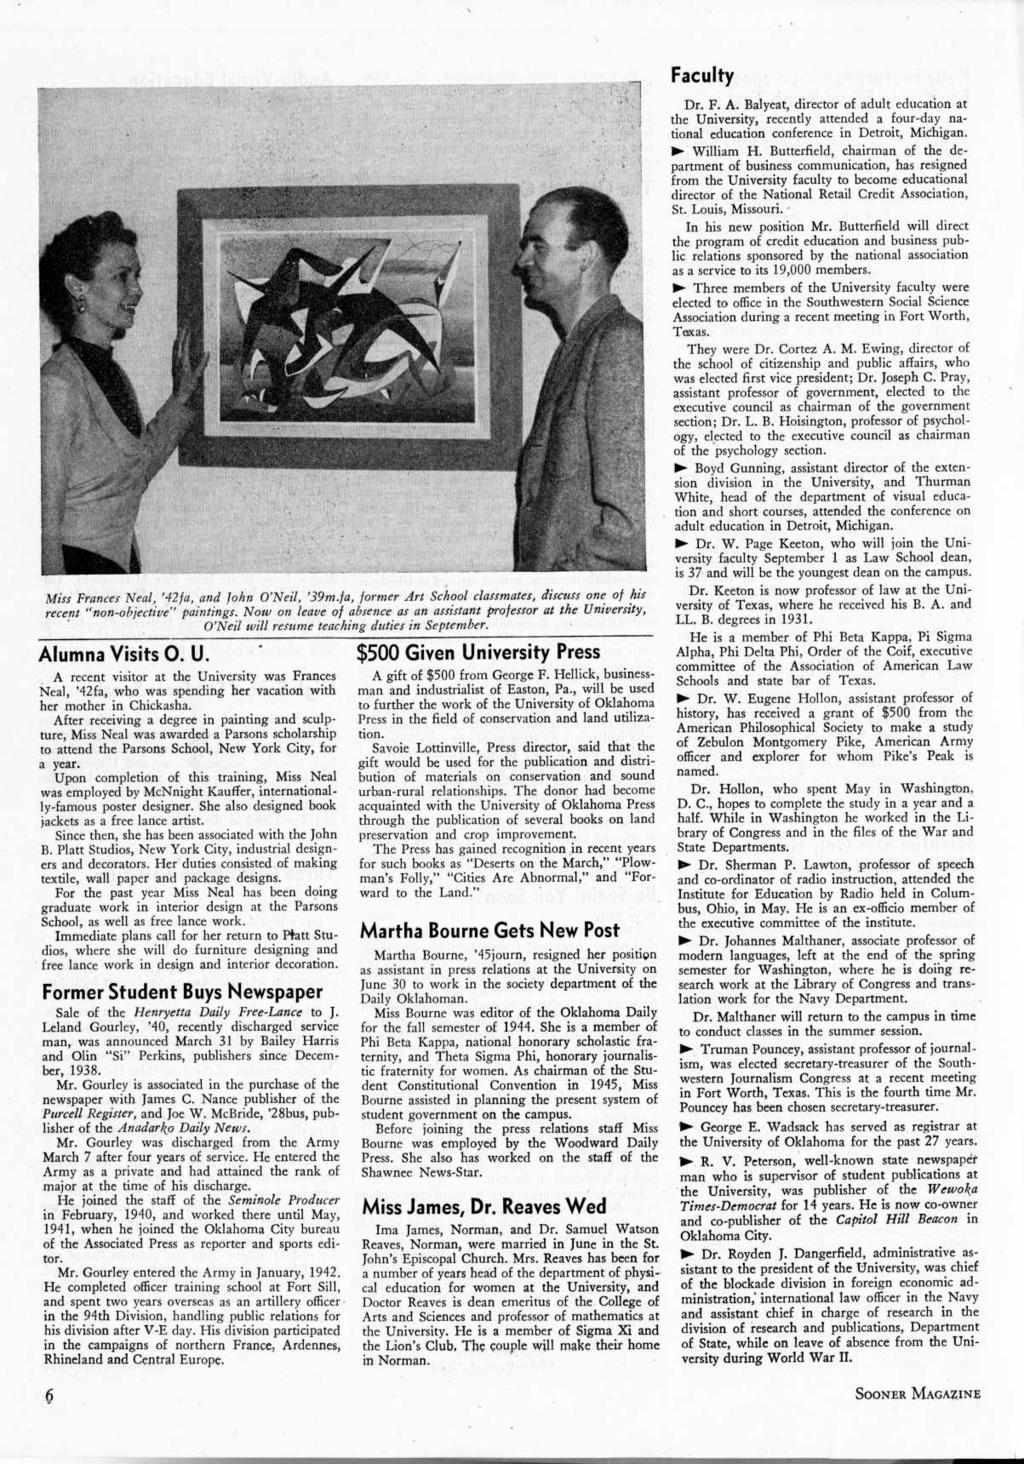 Miss Frances Neal, '42fa, and John O'Neil, '39m fa, former Art School classmates, discuss one of his recent "non-objective" paintings Now on leave of absence as an assistant professor at the